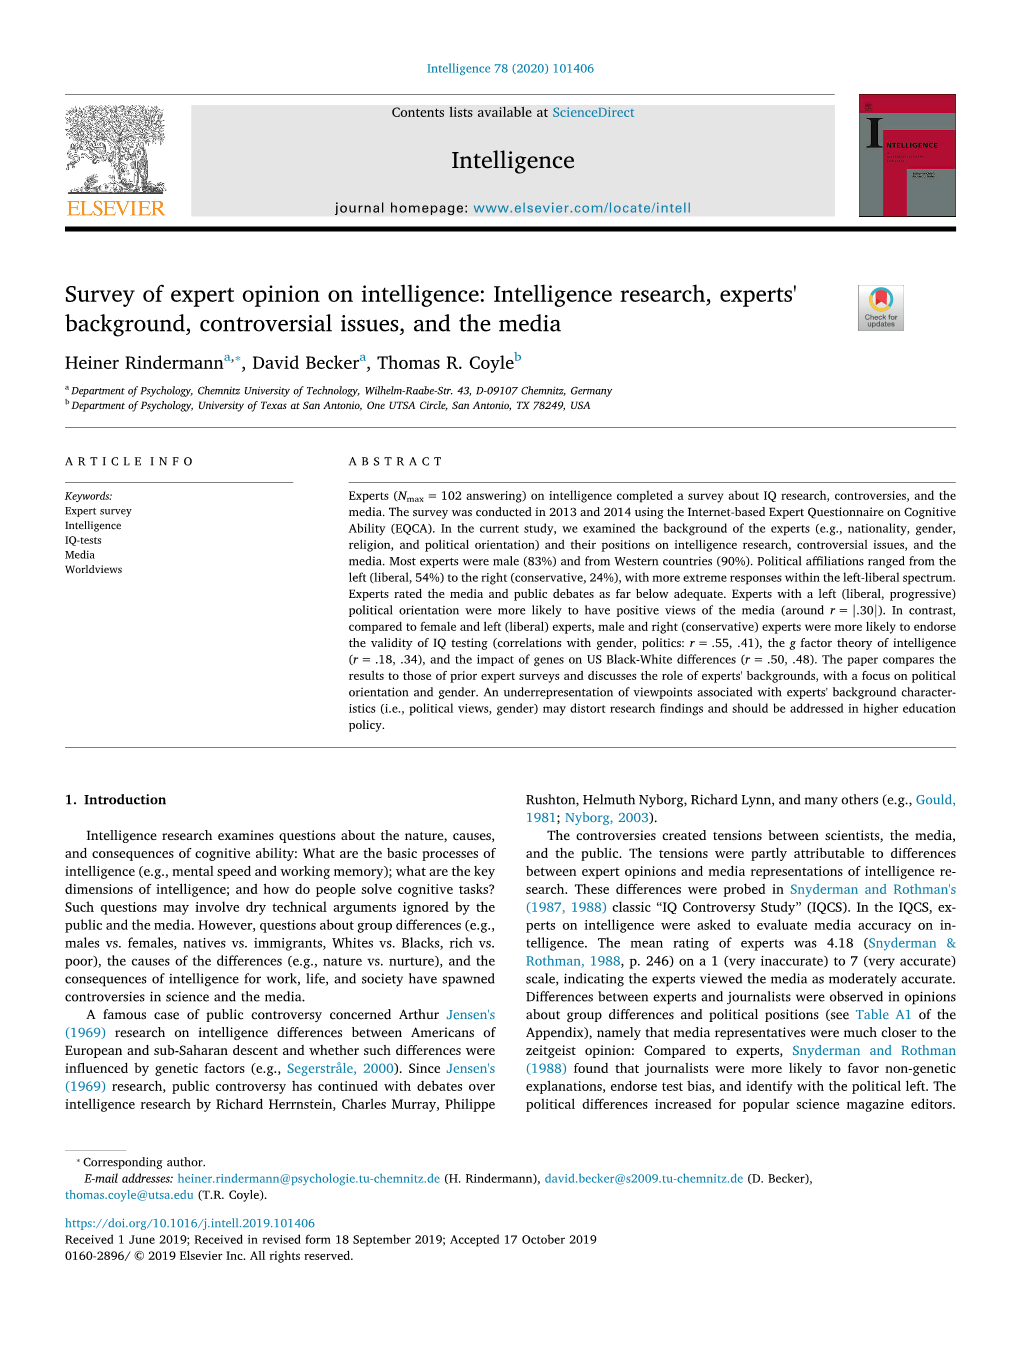 Survey of Expert Opinion on Intelligence Intelligence Research